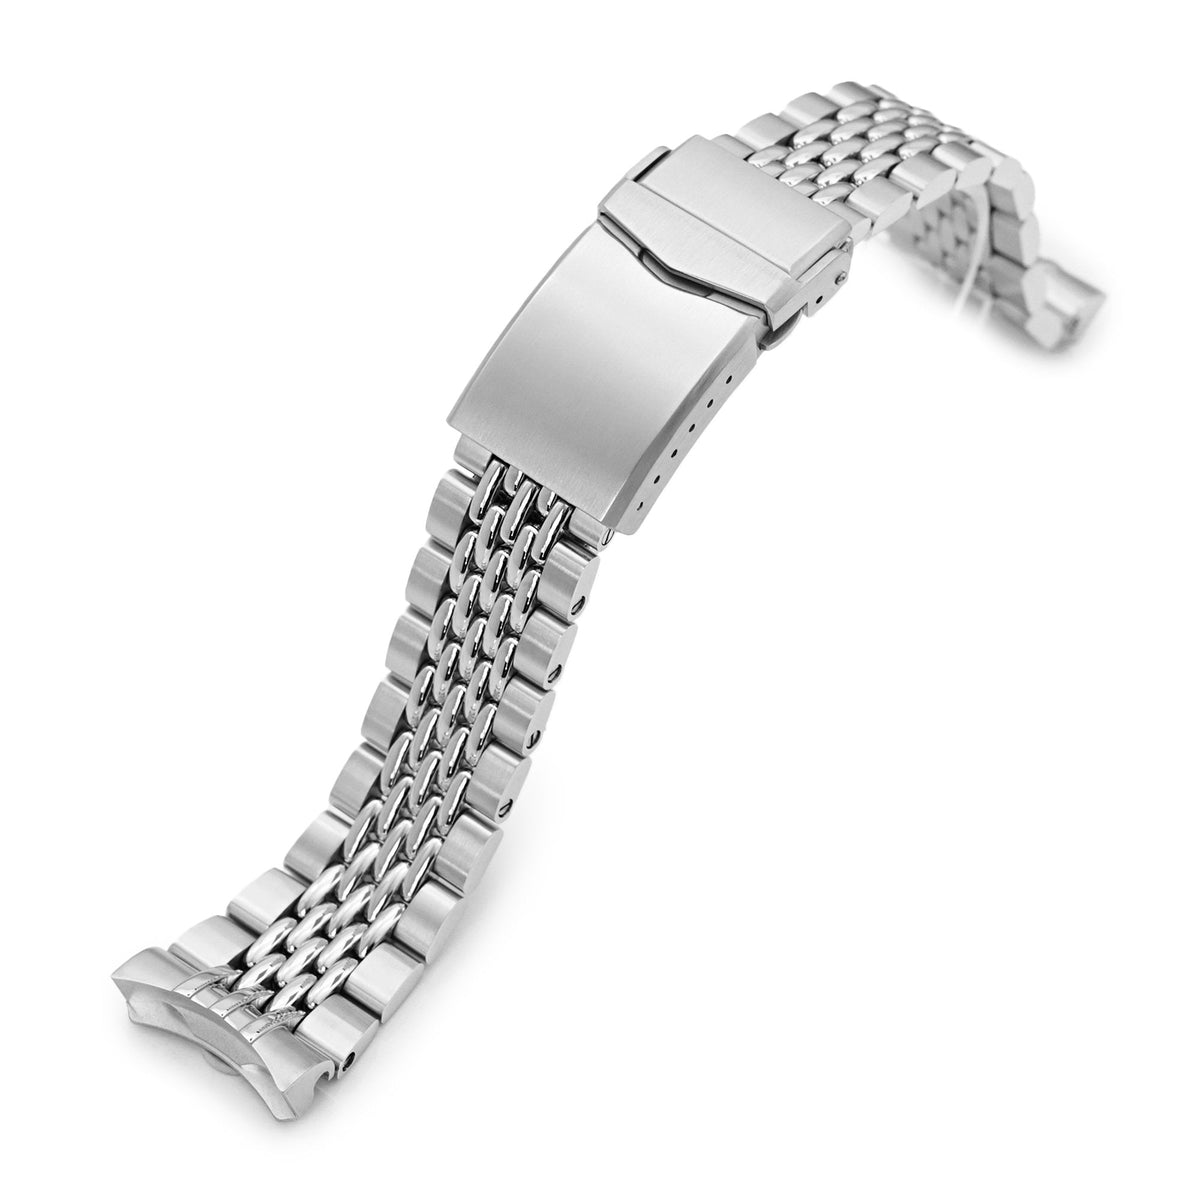 22mm Goma BOR Watch Band for Seiko GMT SSK001, 316L Stainless Steel Brushed and Polished V-Clasp Strapcode Watch Bands